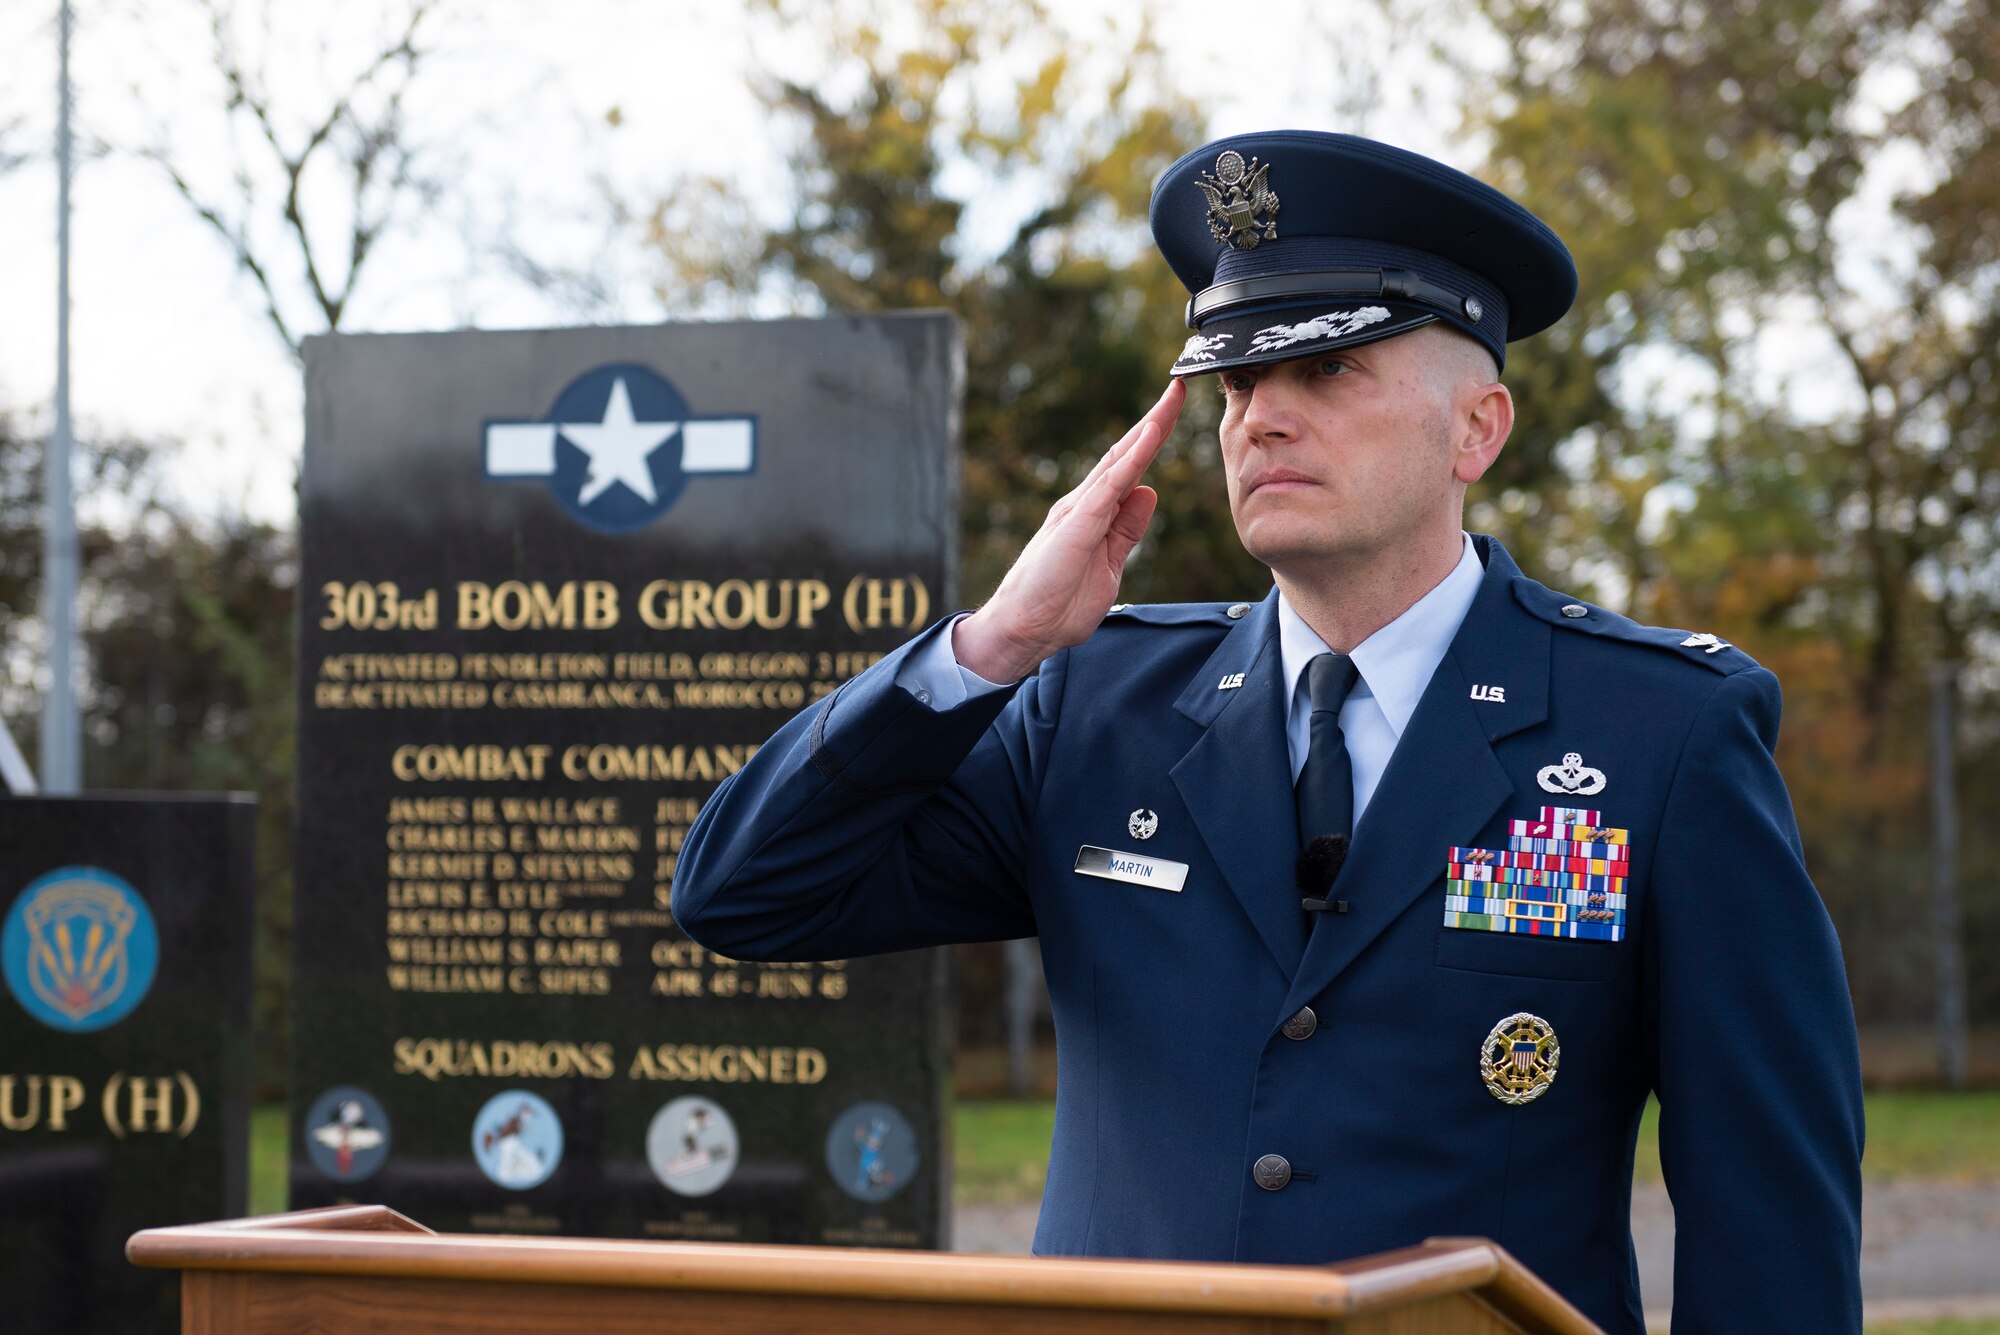 U.S. Air Force Col. Richard Martin, 423rd Air Base Group commander, salutes during a Remembrance Sunday ceremony near the 303rd Bombardment Group memorial monument at RAF Molesworth, England, Nov. 3, 2020. Remembrance Sunday is commemorated the second Sunday every November to honor the service and sacrifice of Armed Forces, British and Commonwealth veterans, as well as the Allies that fought alongside them in the two World Wars and later conflicts. (U.S. Air Force photo by Senior Airman Jennifer Zima)